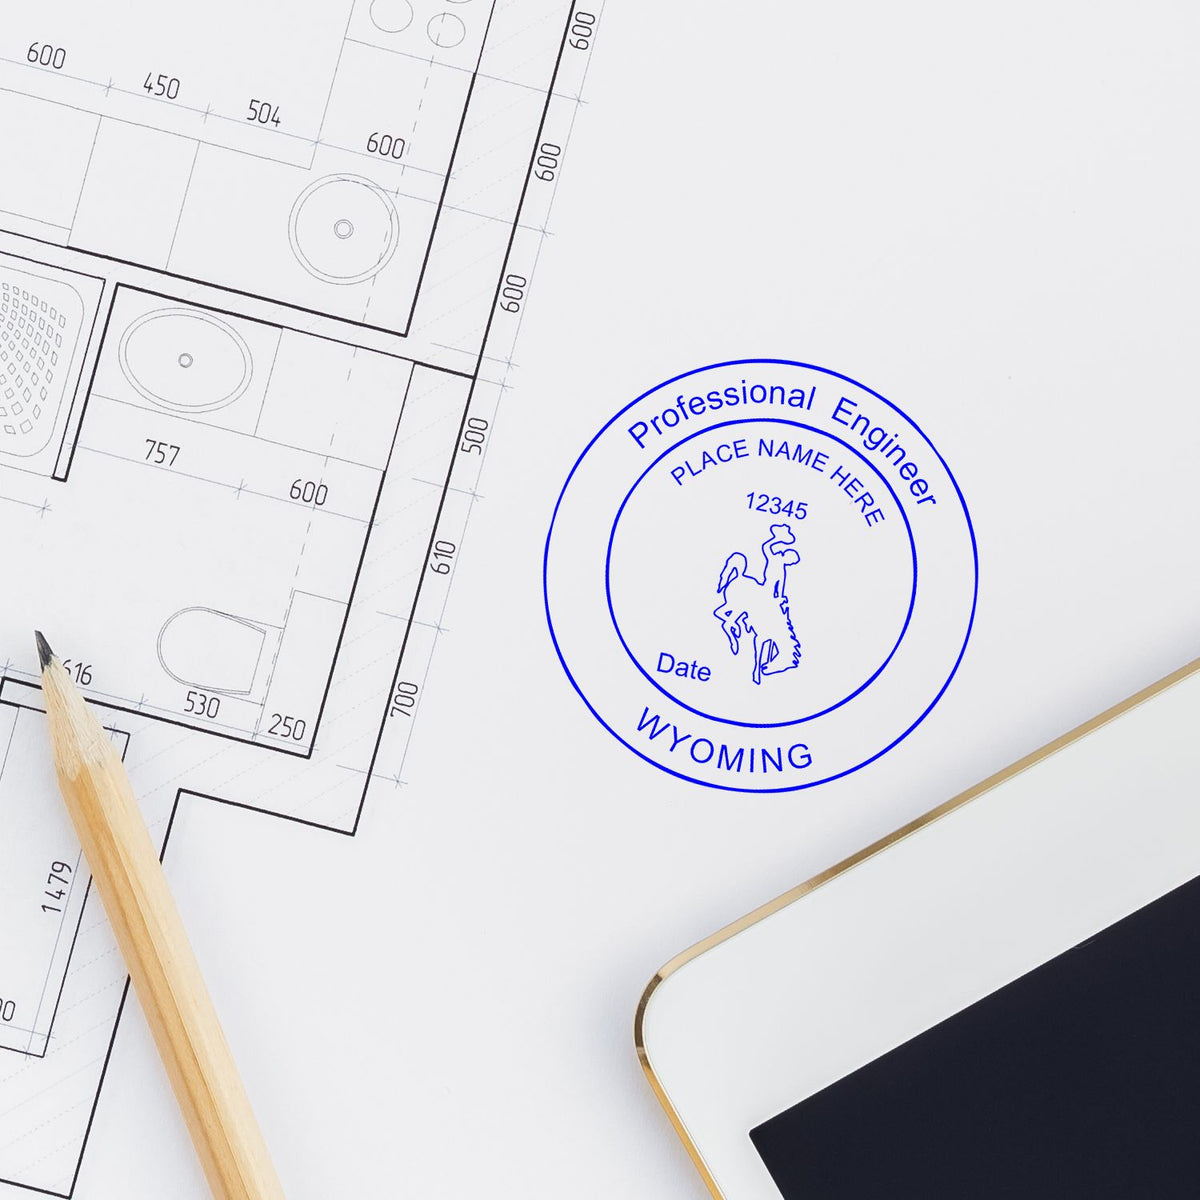 The Wyoming Professional Engineer Seal Stamp stamp impression comes to life with a crisp, detailed photo on paper - showcasing true professional quality.